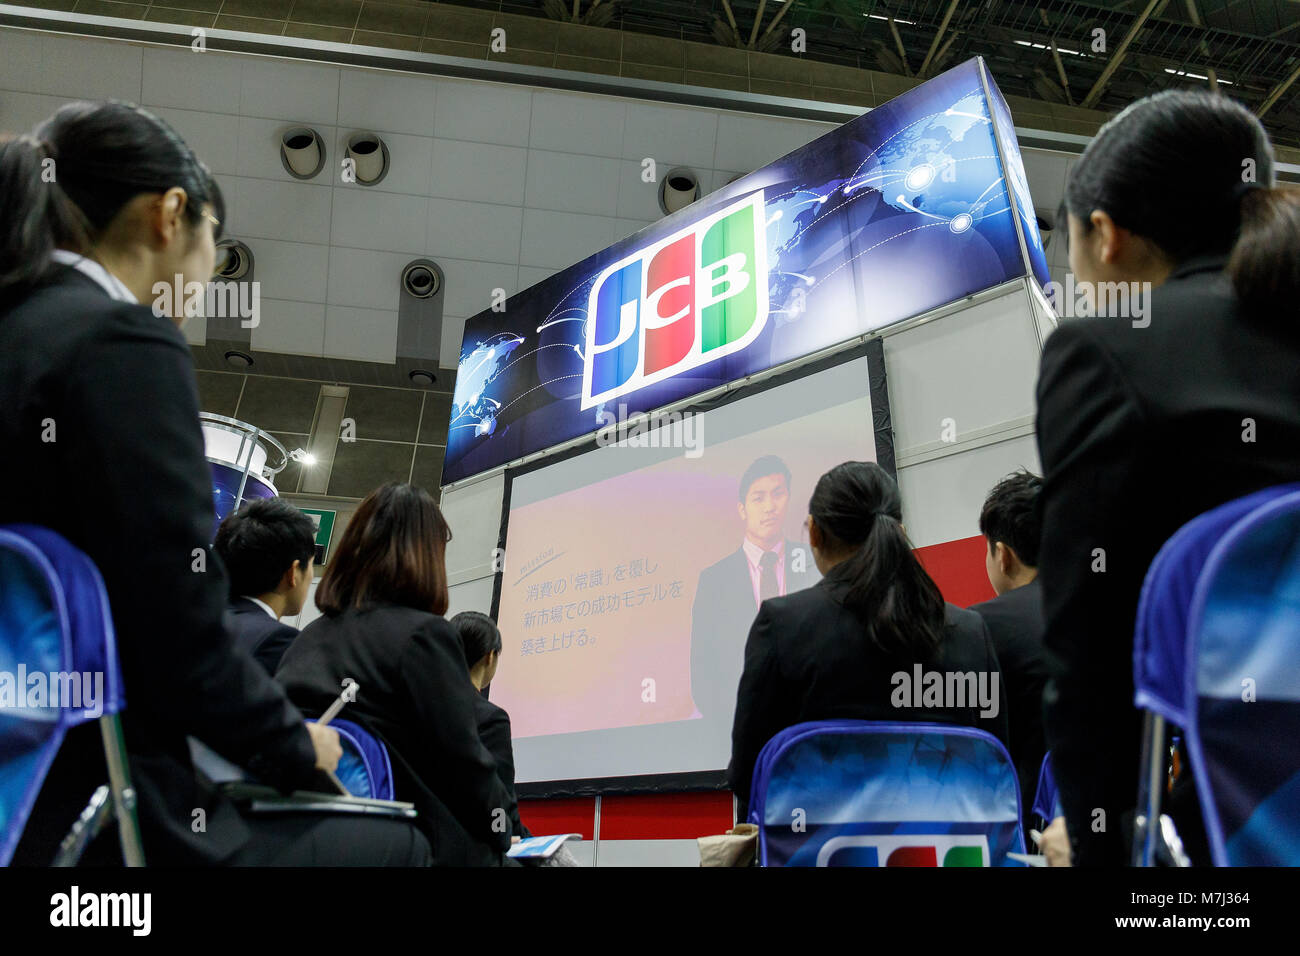 University students listen to a company recruiter at a job fair at Tokyo Big Sight on March 11, 2018, Tokyo, Japan. Japanese students who are set to graduate next Spring attended a job fair to listen to career seminars and submit job applications during the two-day fair which started today. Credit: Rodrigo Reyes Marin/AFLO/Alamy Live News Stock Photo